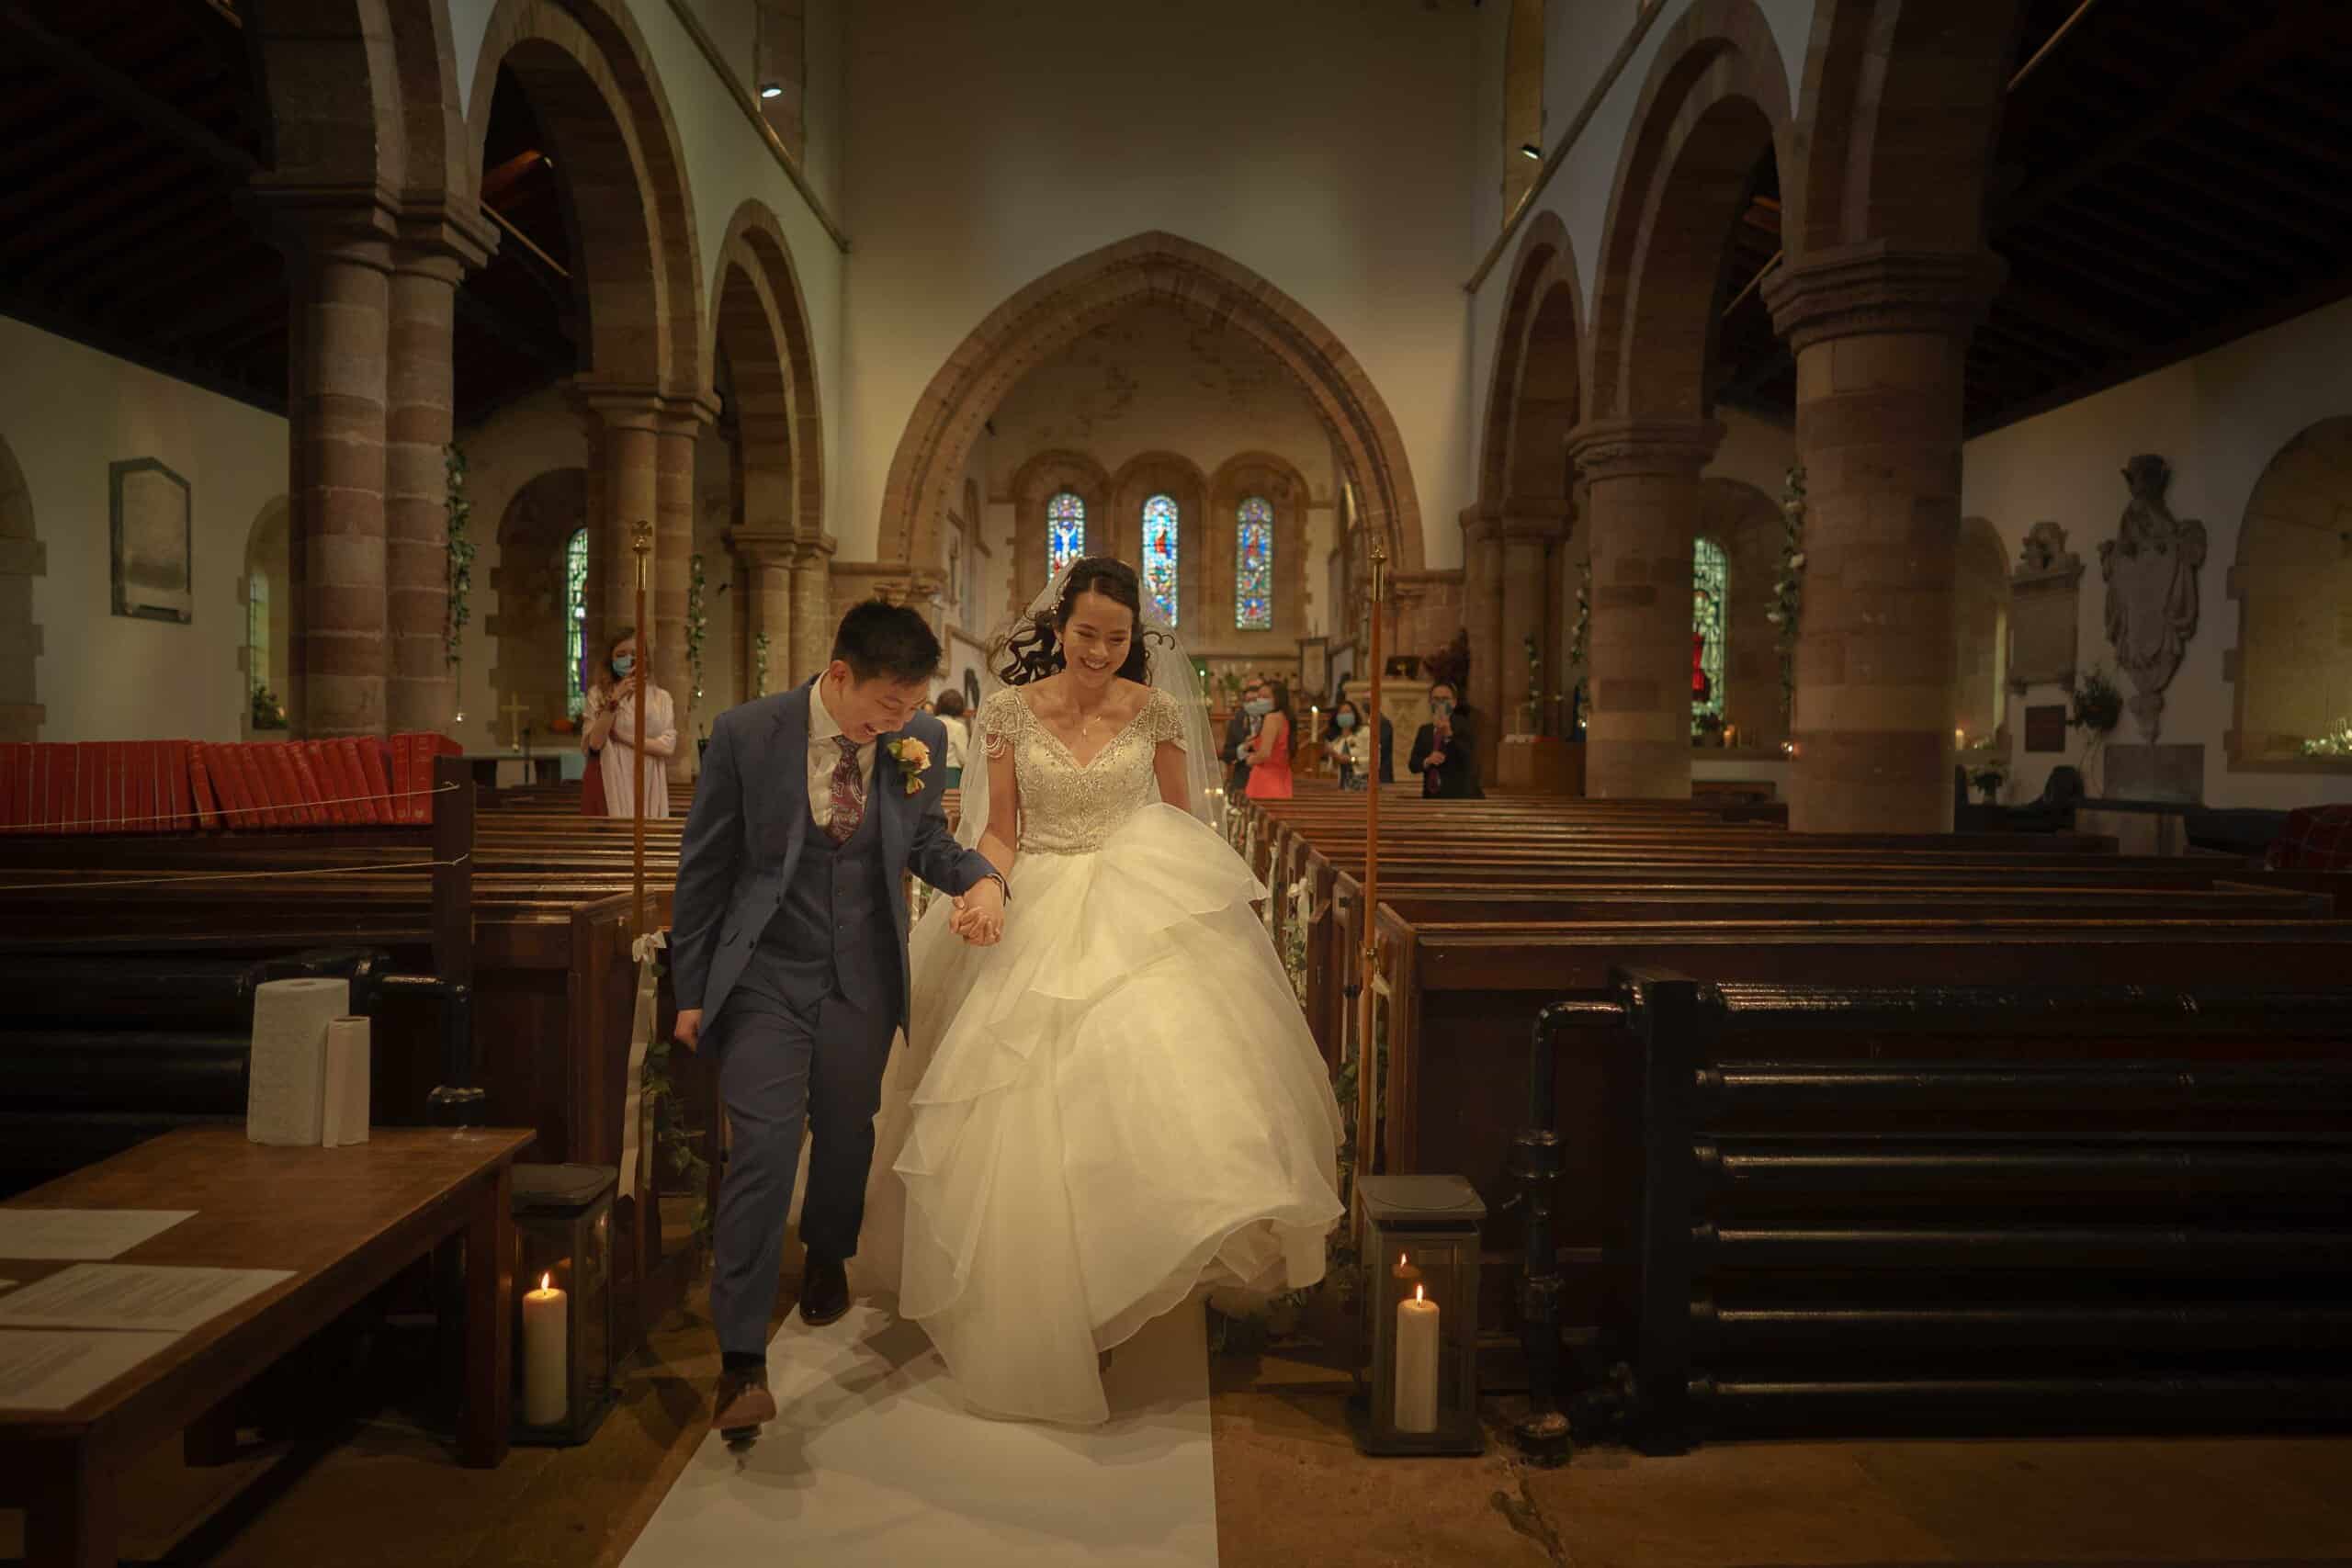 The bride and couple leave the Church after their shropshire wedding